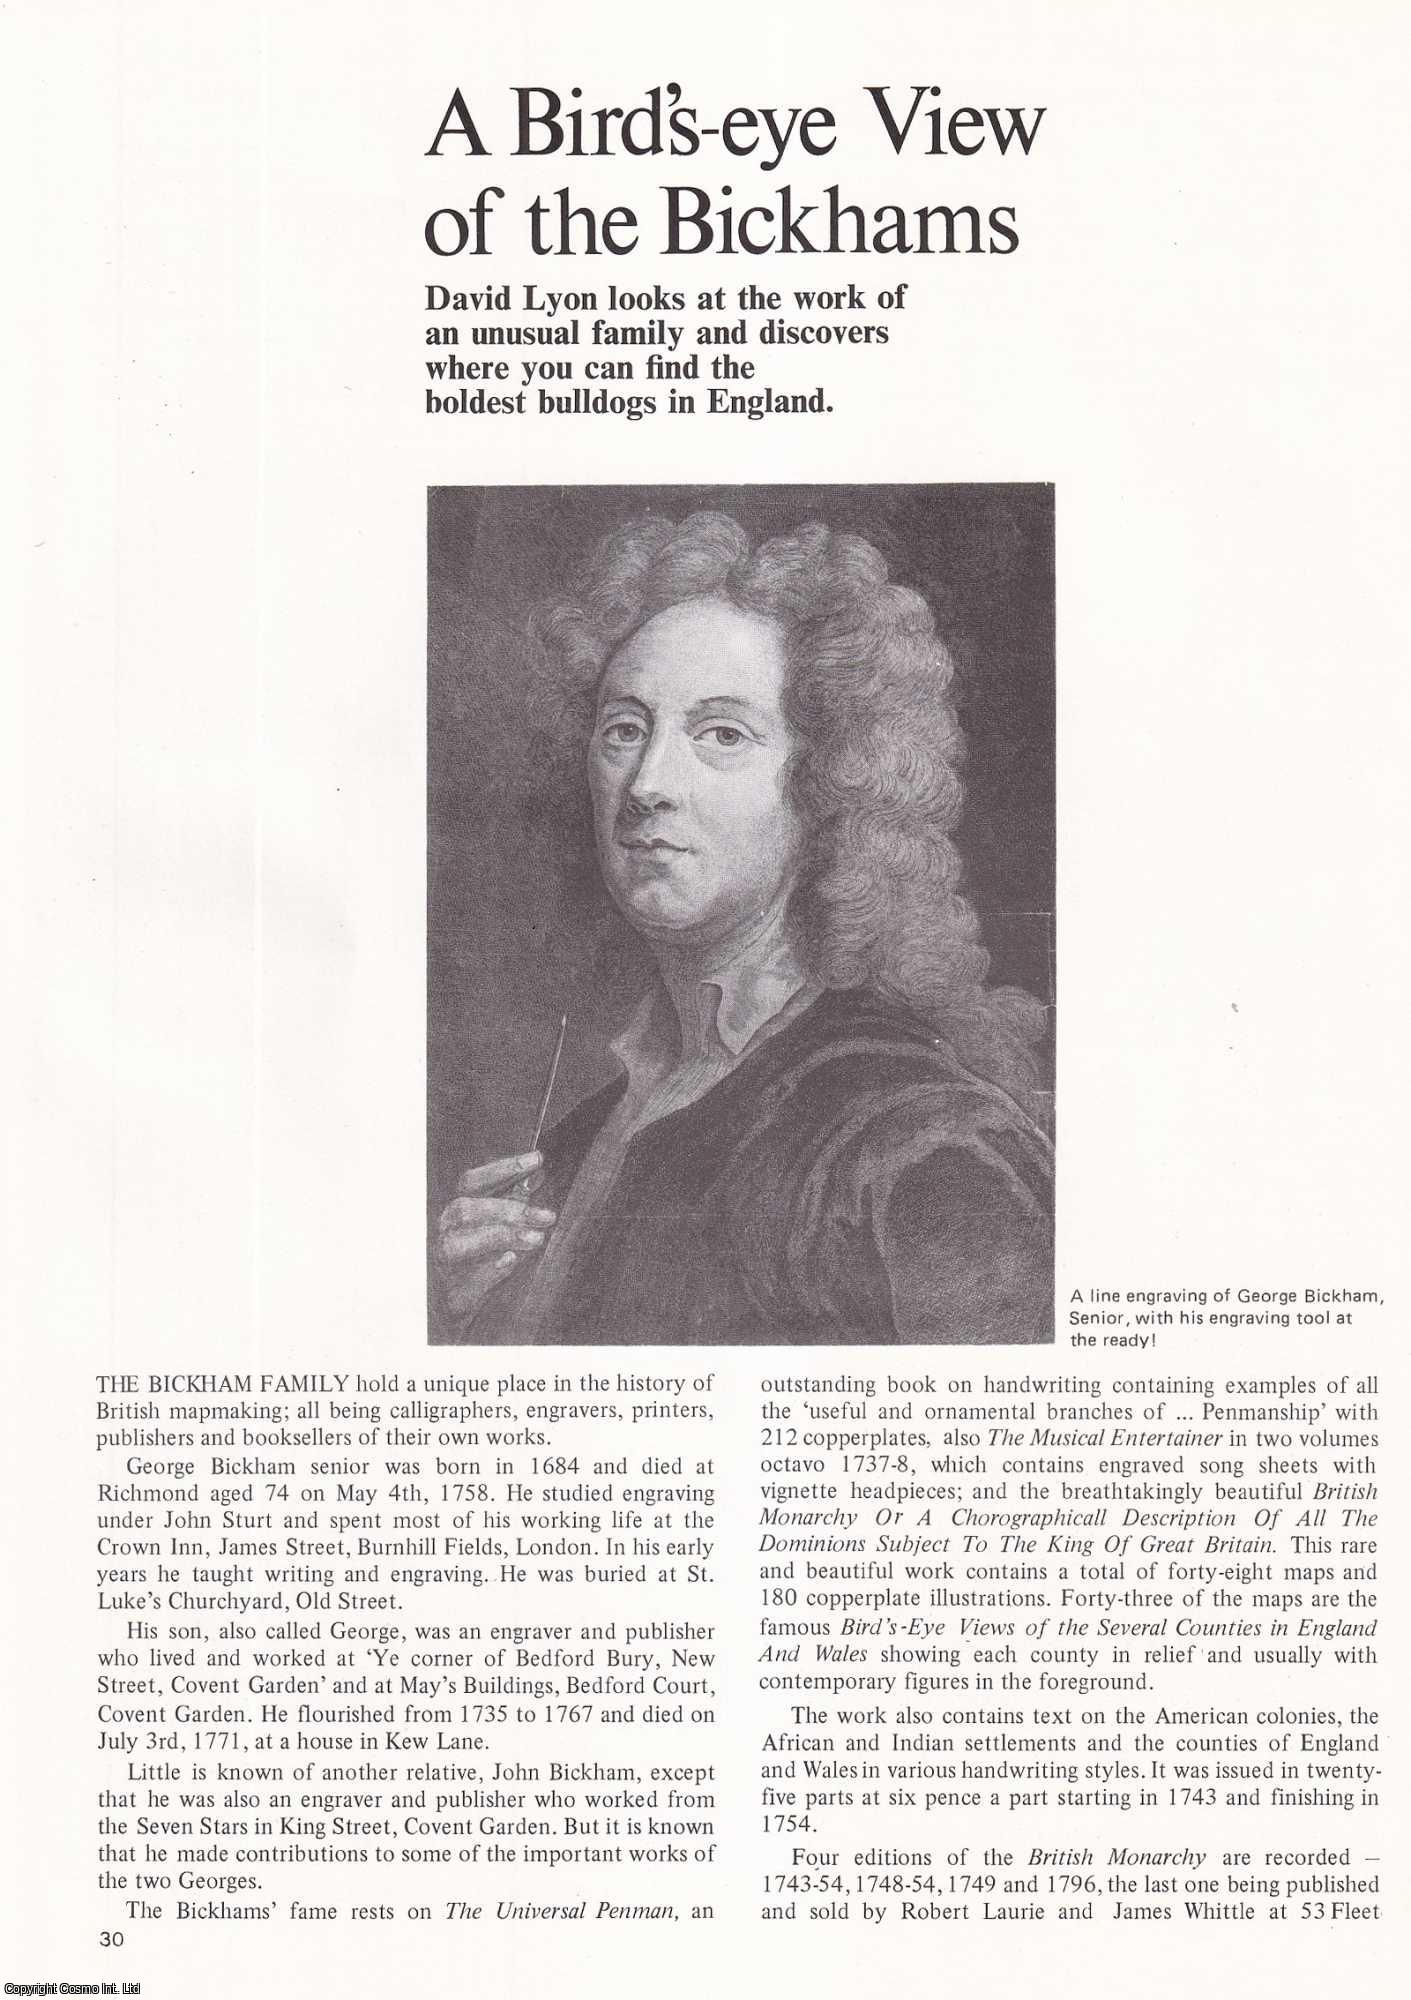 David Lyon - A Bird's-Eye View of the Bickhams: Calligraphers, Engravers, Printers, Publishers and Booksellers of Their Own Work. An original article from Map Collector Magazine, 1978.